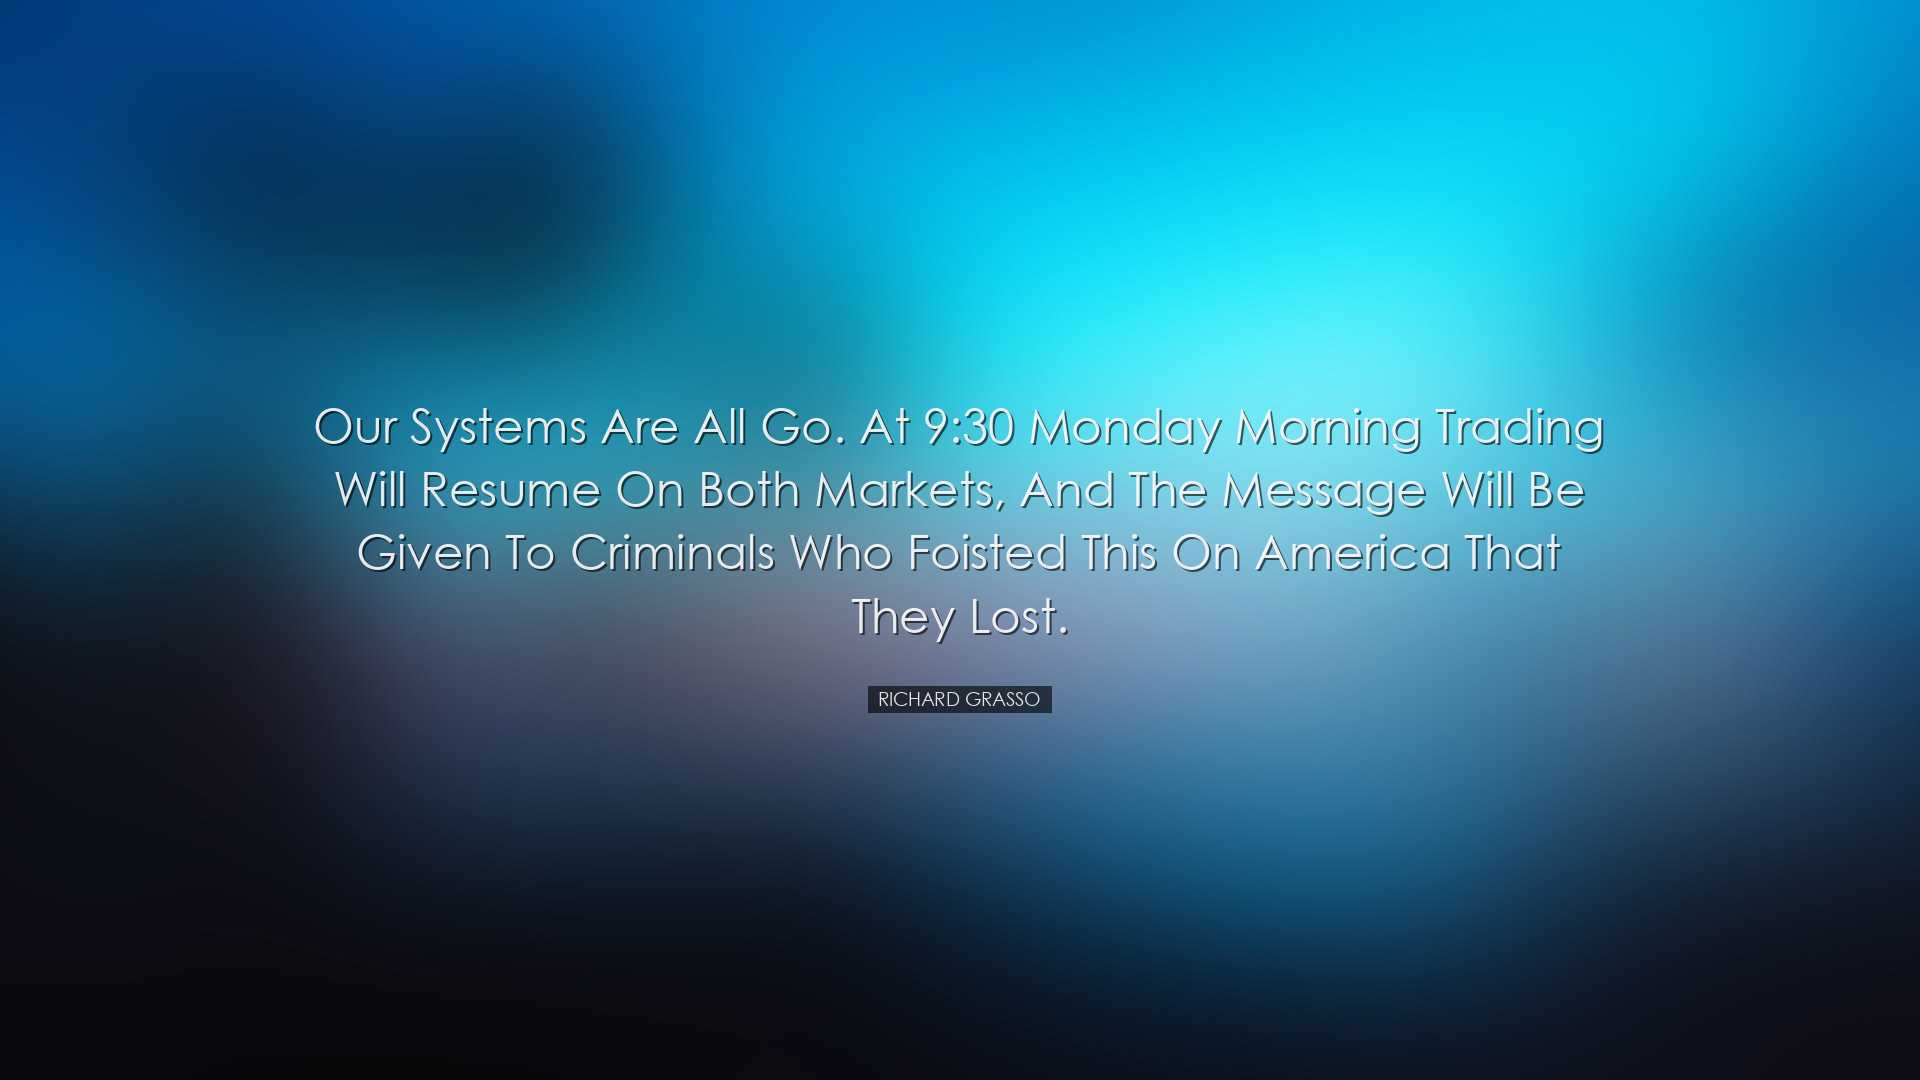 Our systems are all go. At 9:30 Monday morning trading will resume